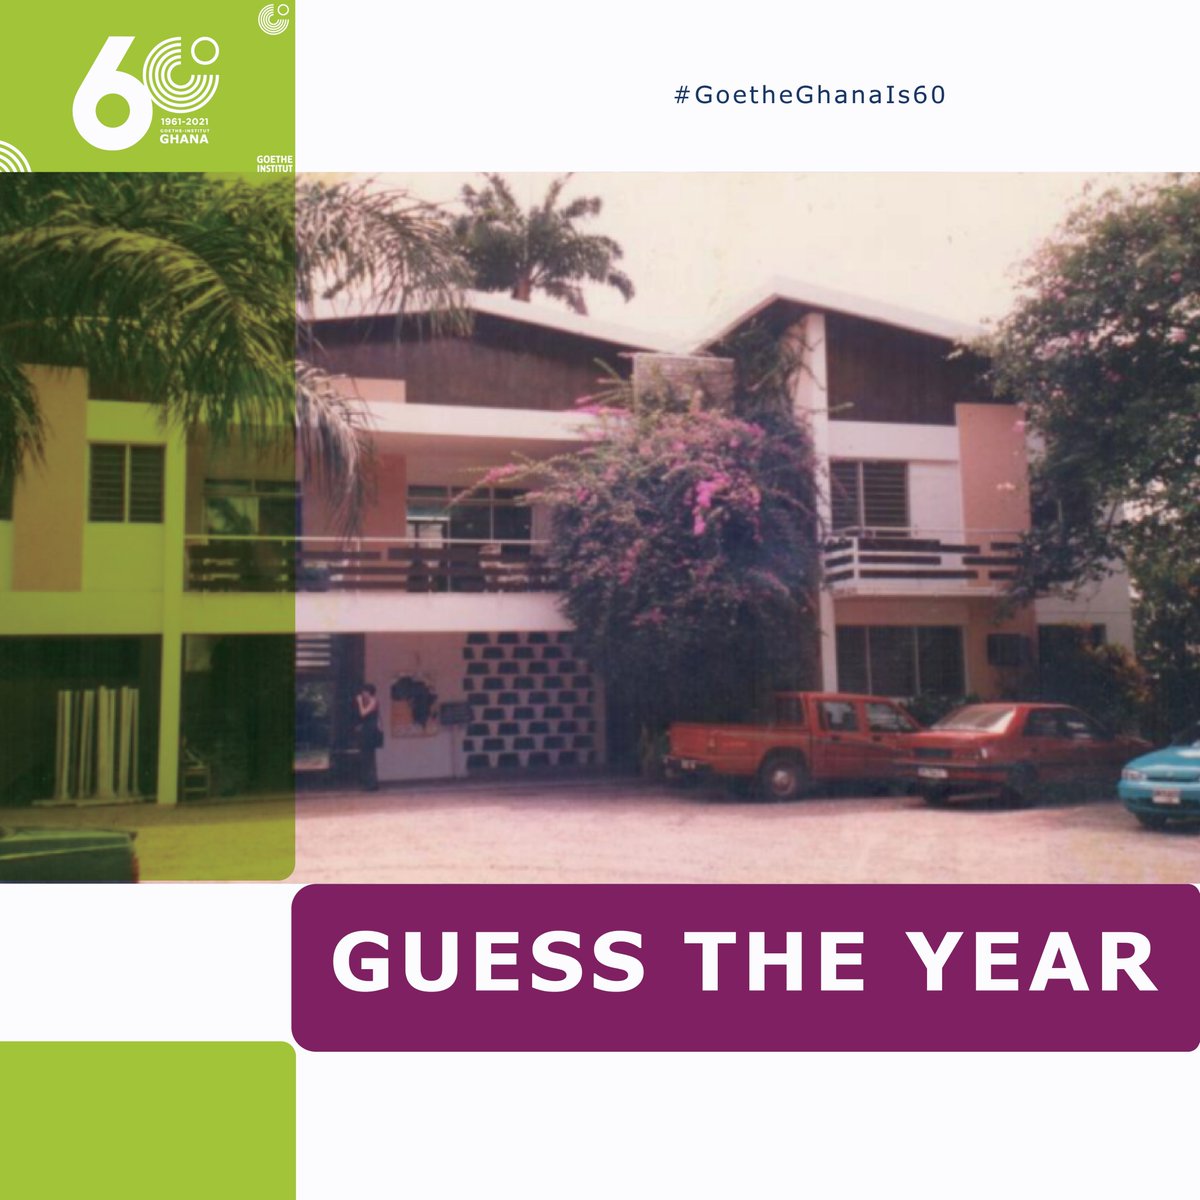 Another shot of the Goethe-Institut Ghana from our time in Osu, Danquah Circle. 

Can you Guess which year this was taken? #GoetheGhanais60

Clue: Between the 80’s and 90’s 🤓
____
#goetheinstitut  #goetheopportunities #goetheinstitutghana #goetheghana